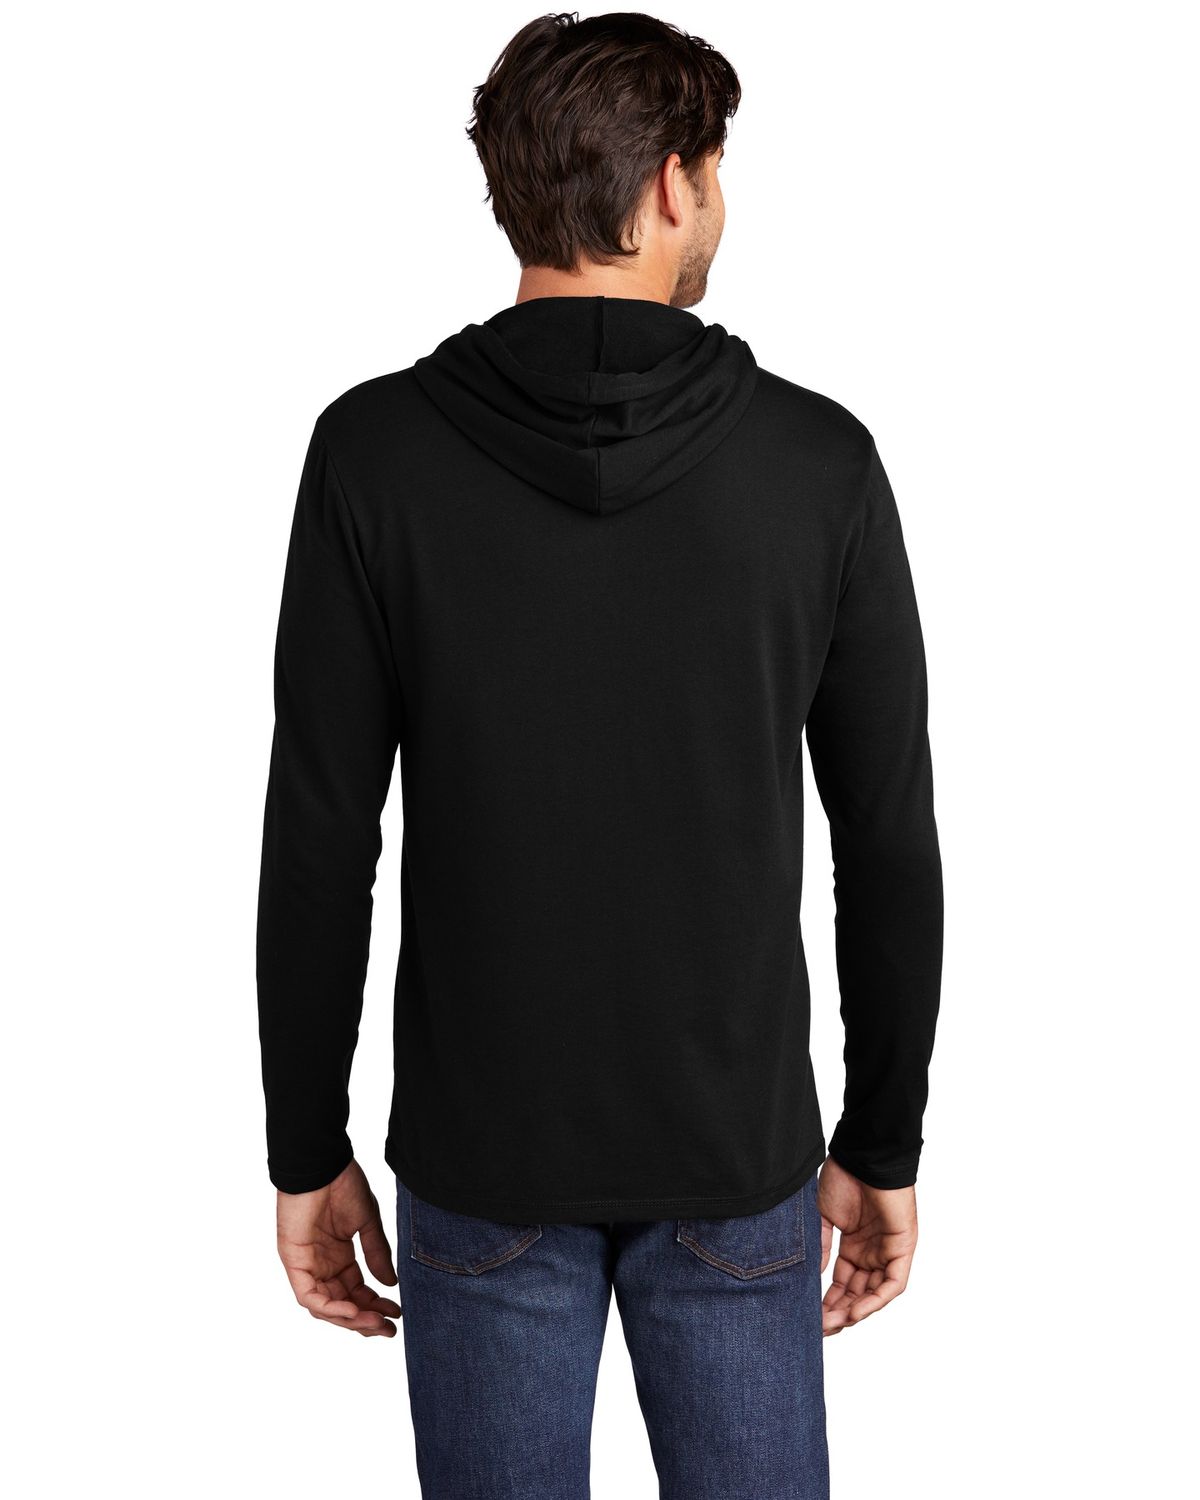 'District DT571 Featherweight French Terry  Hoodie'